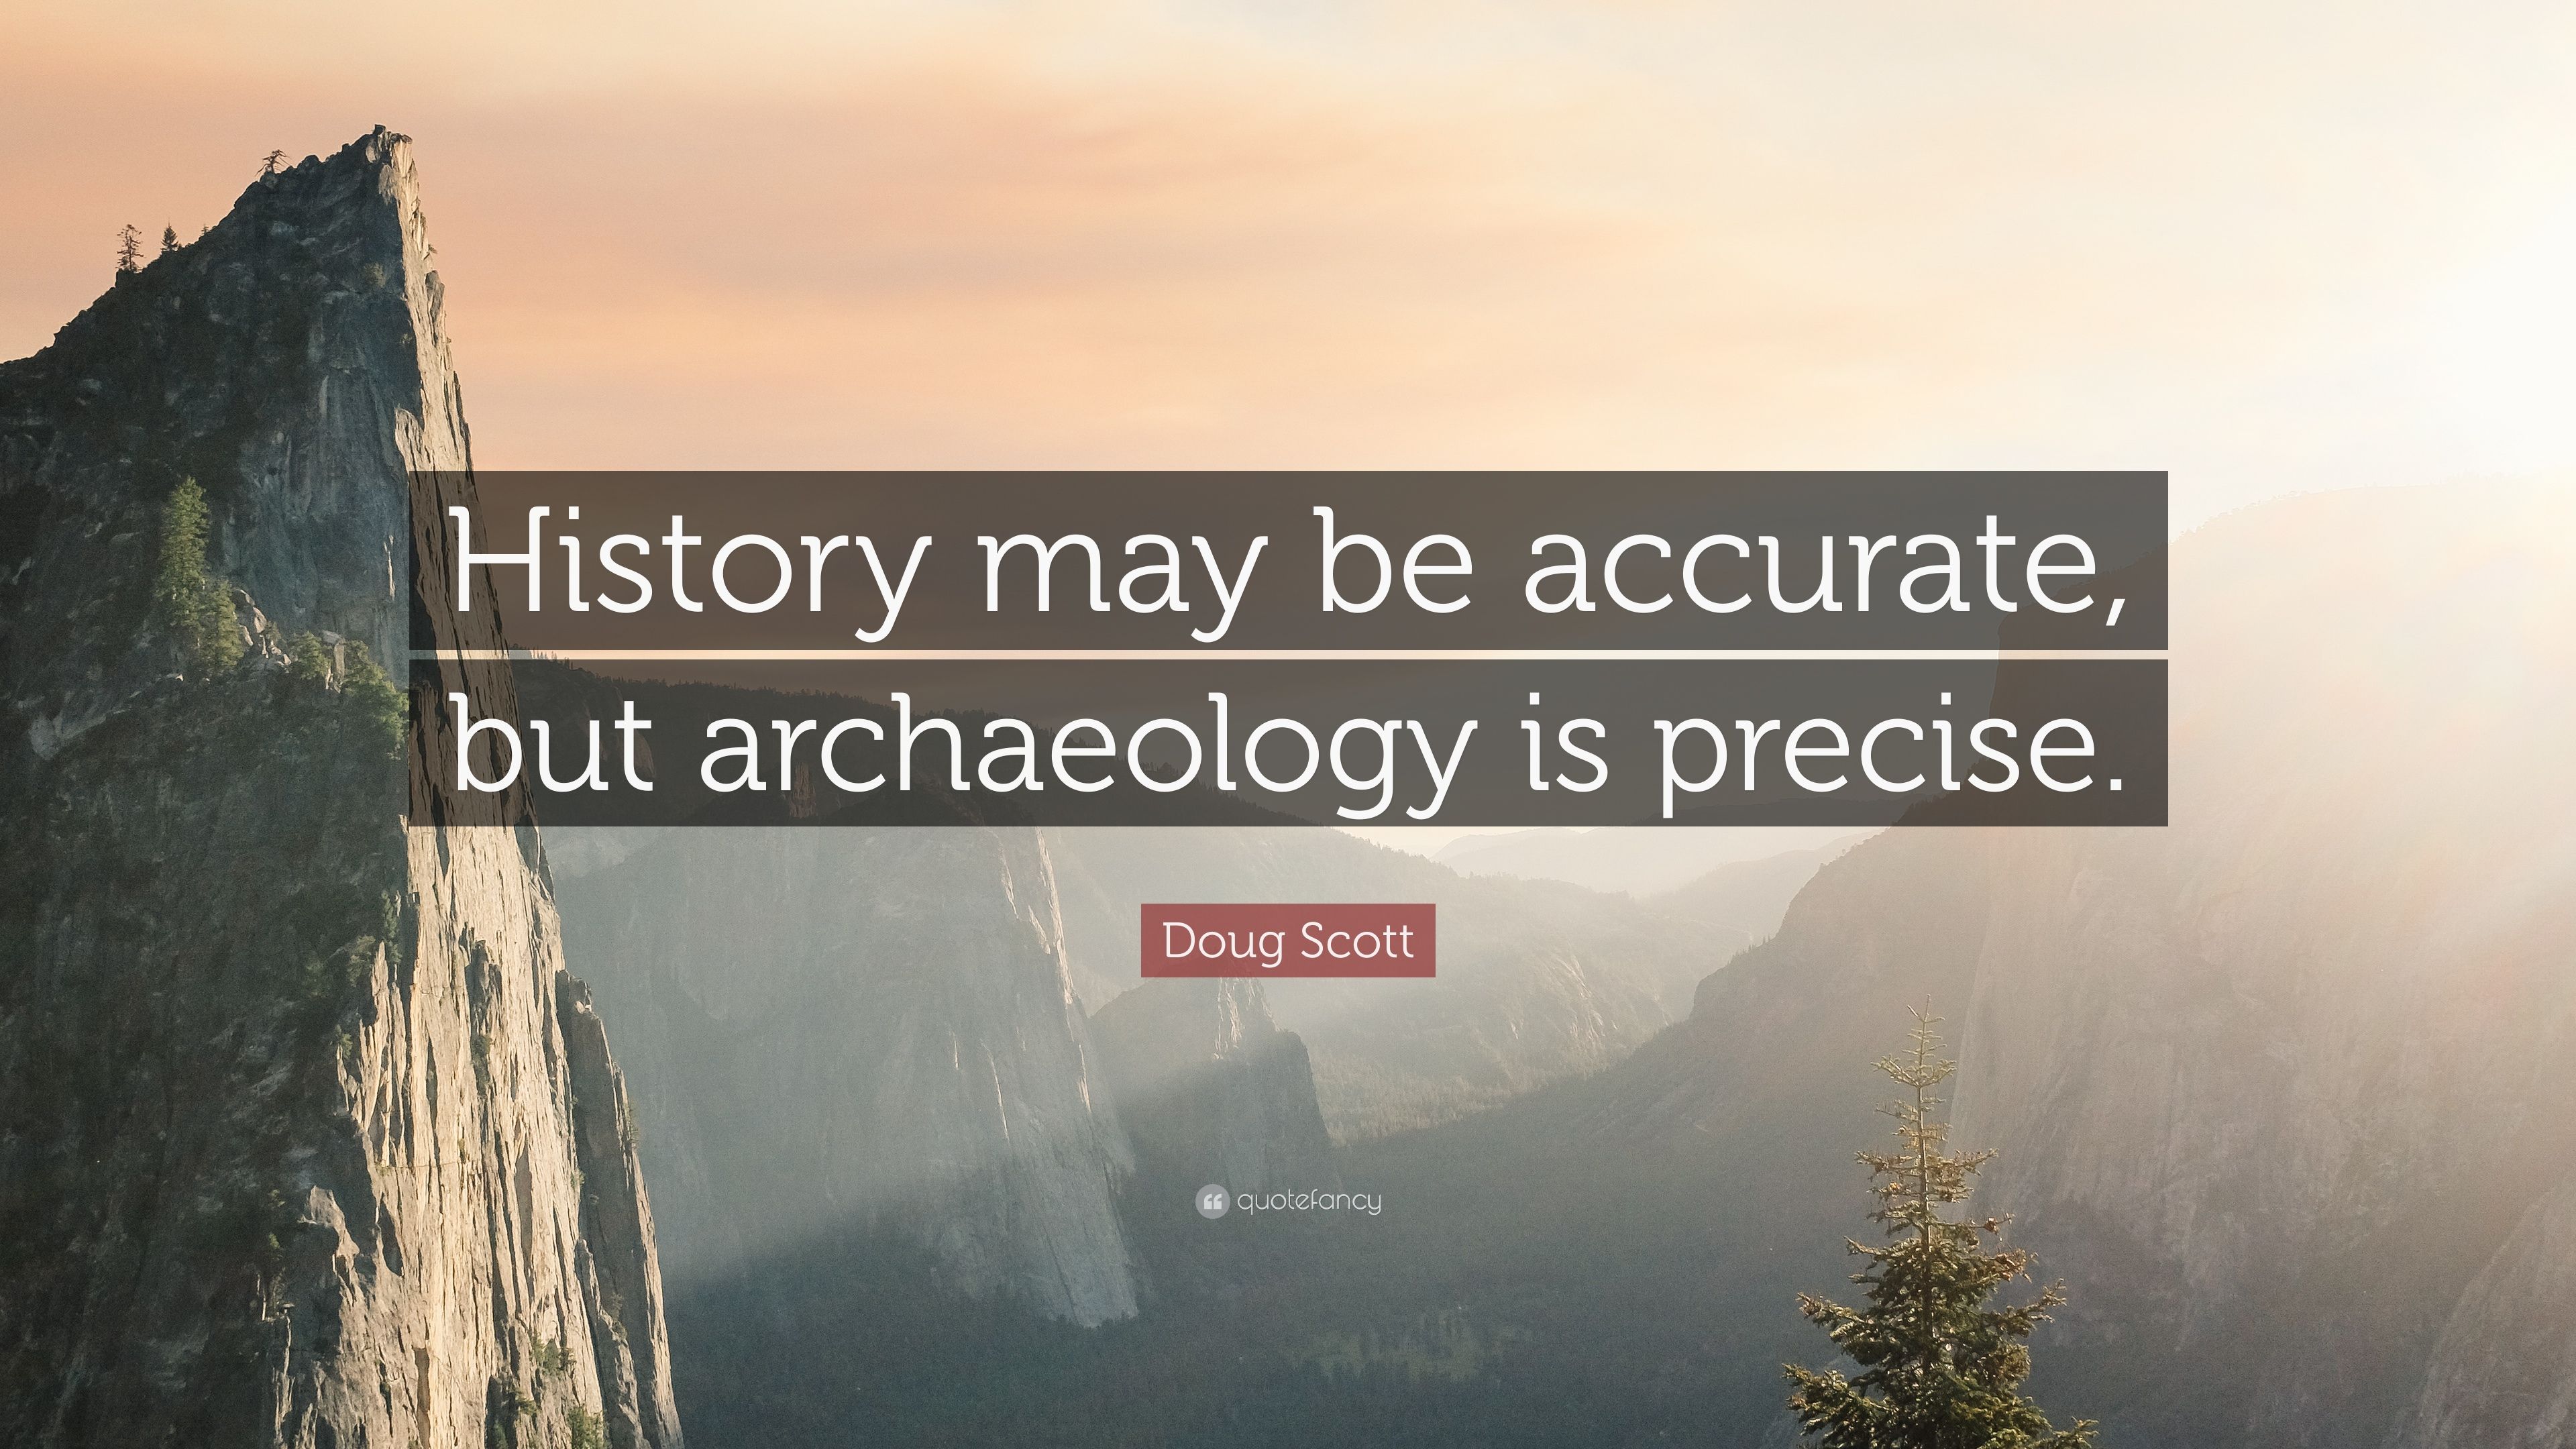 Doug Scott Quote: “History may be accurate, but archaeology is